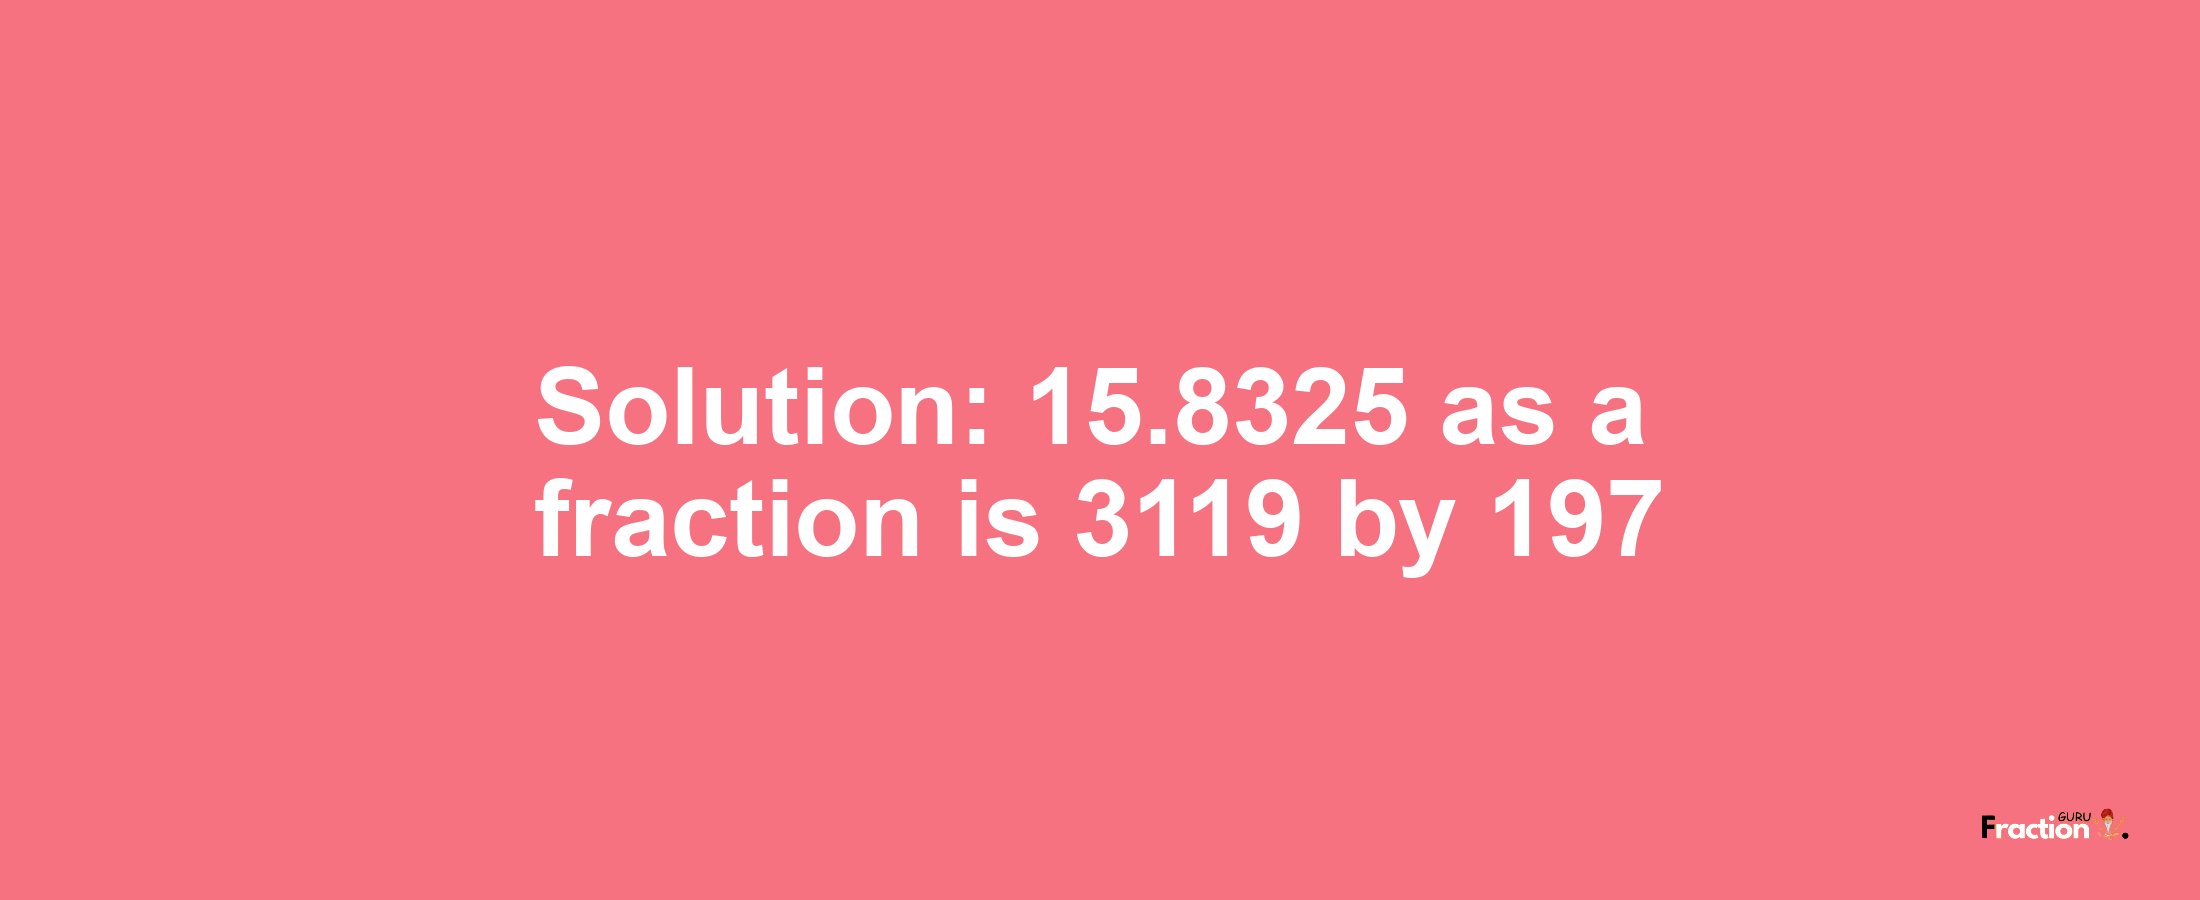 Solution:15.8325 as a fraction is 3119/197